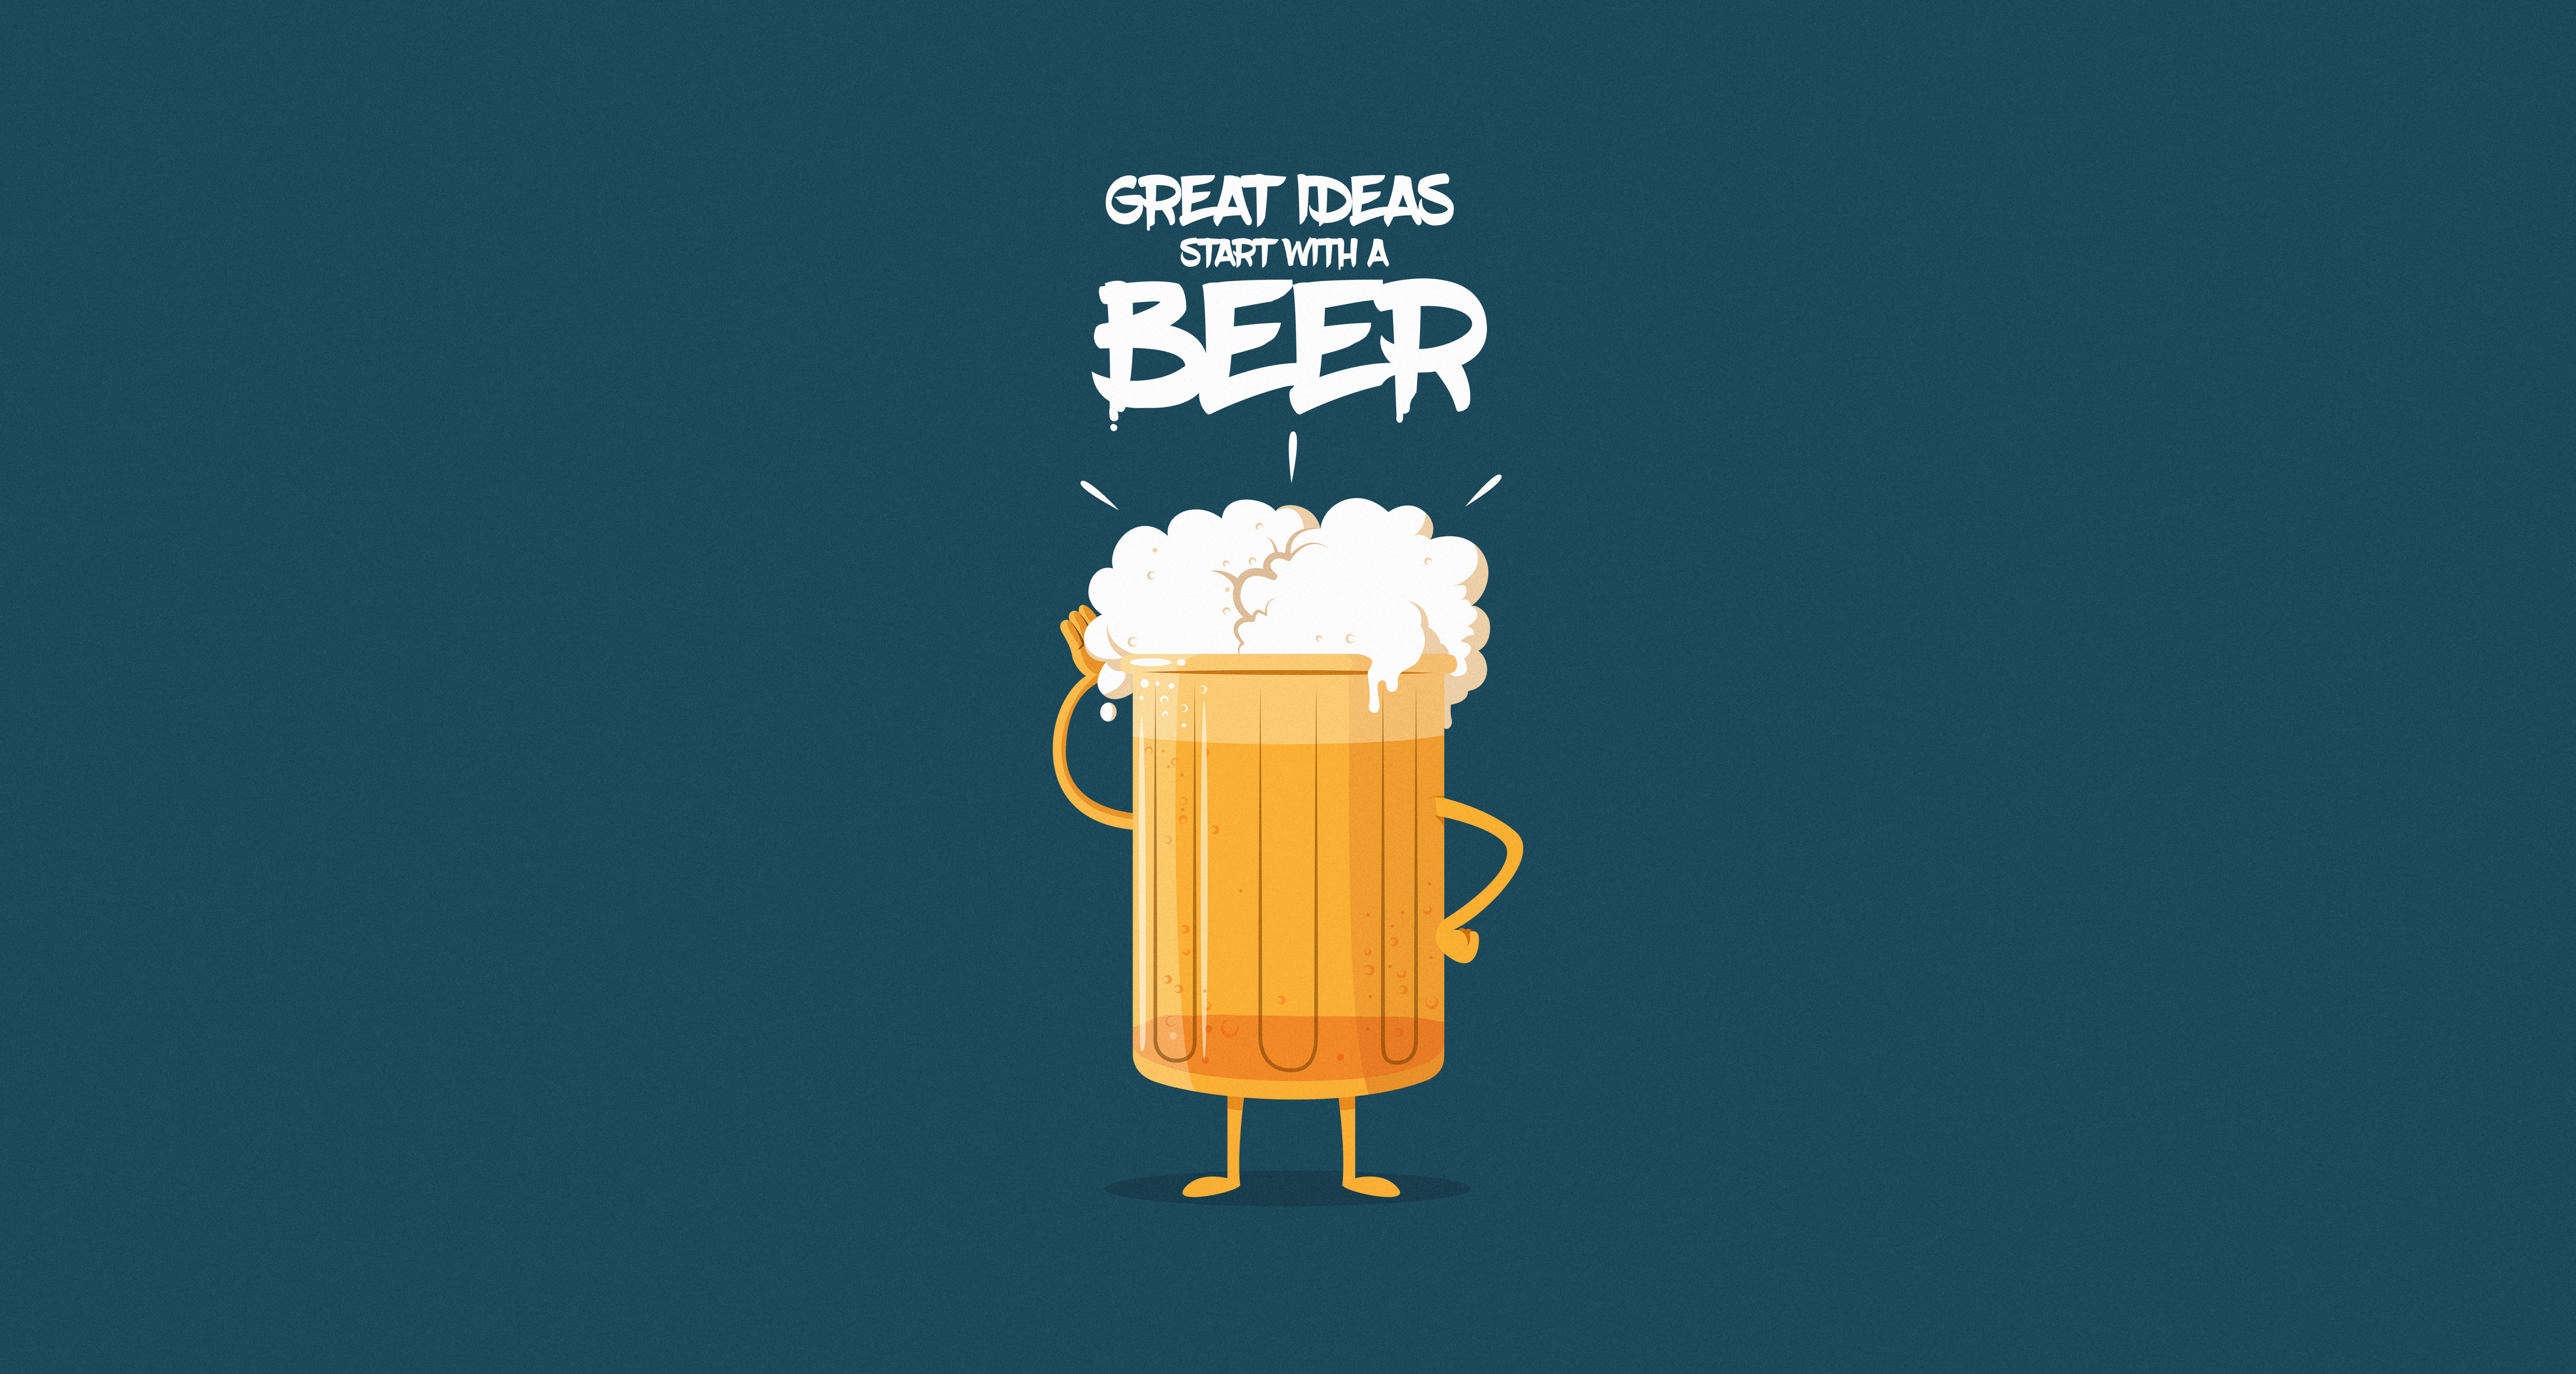 Great Ideas Start with a Beer